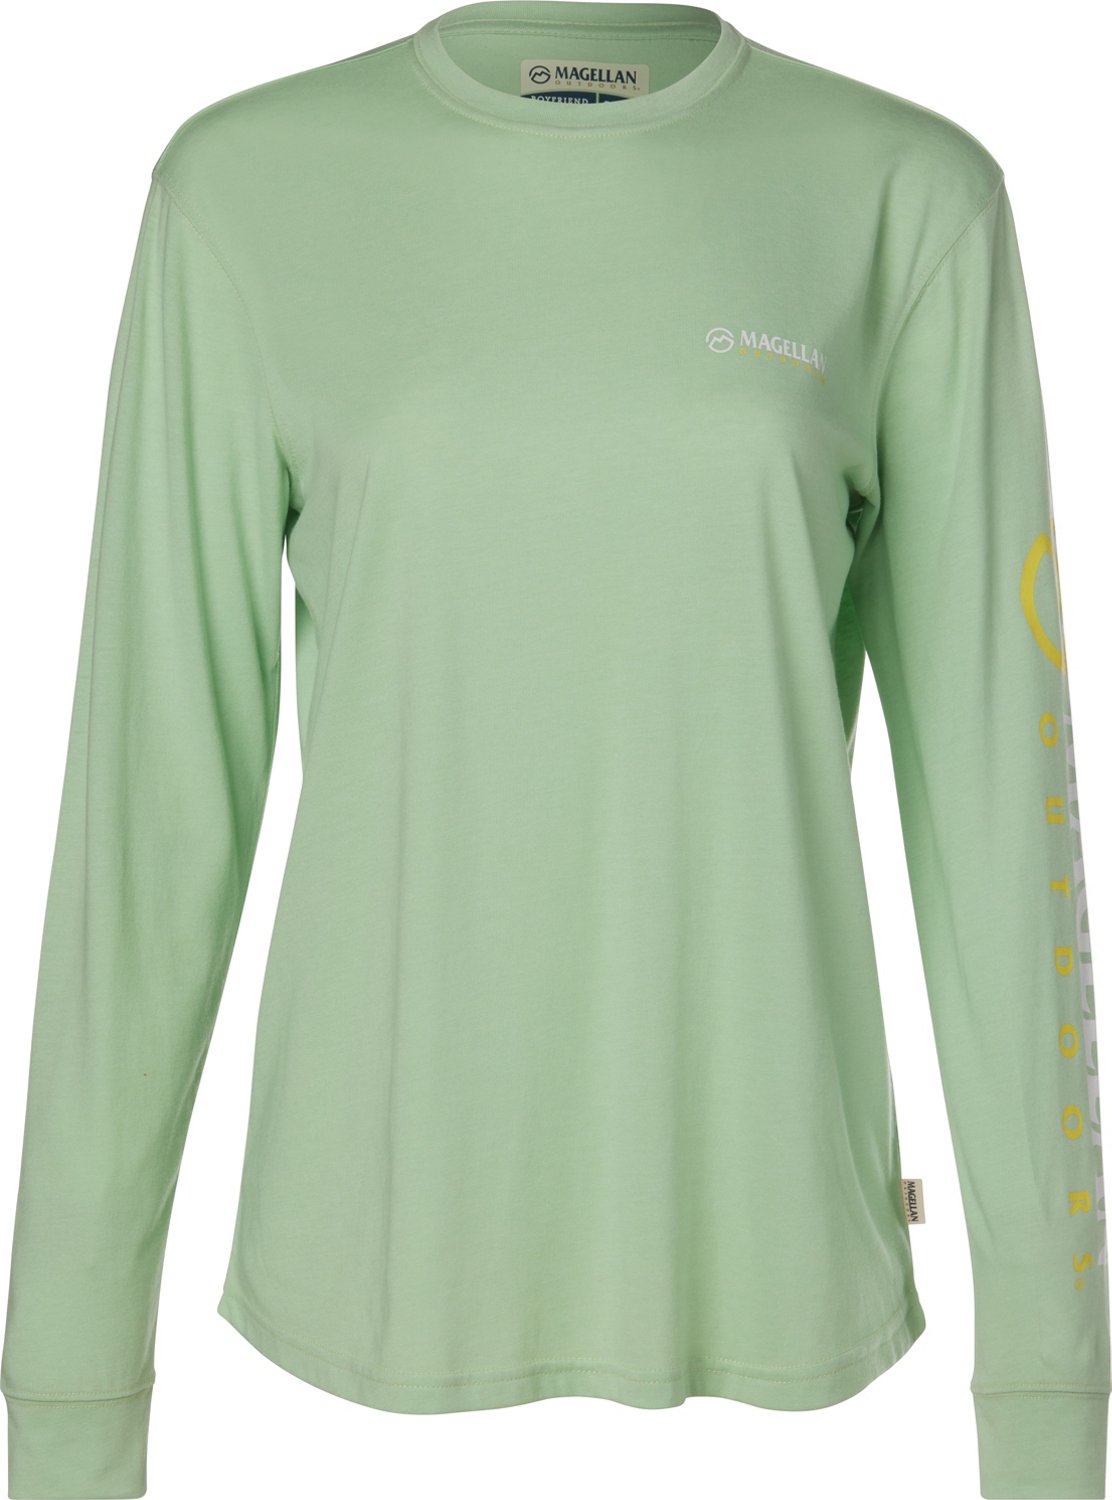 Women's Long Sleeve T-shirts, Explore our New Arrivals